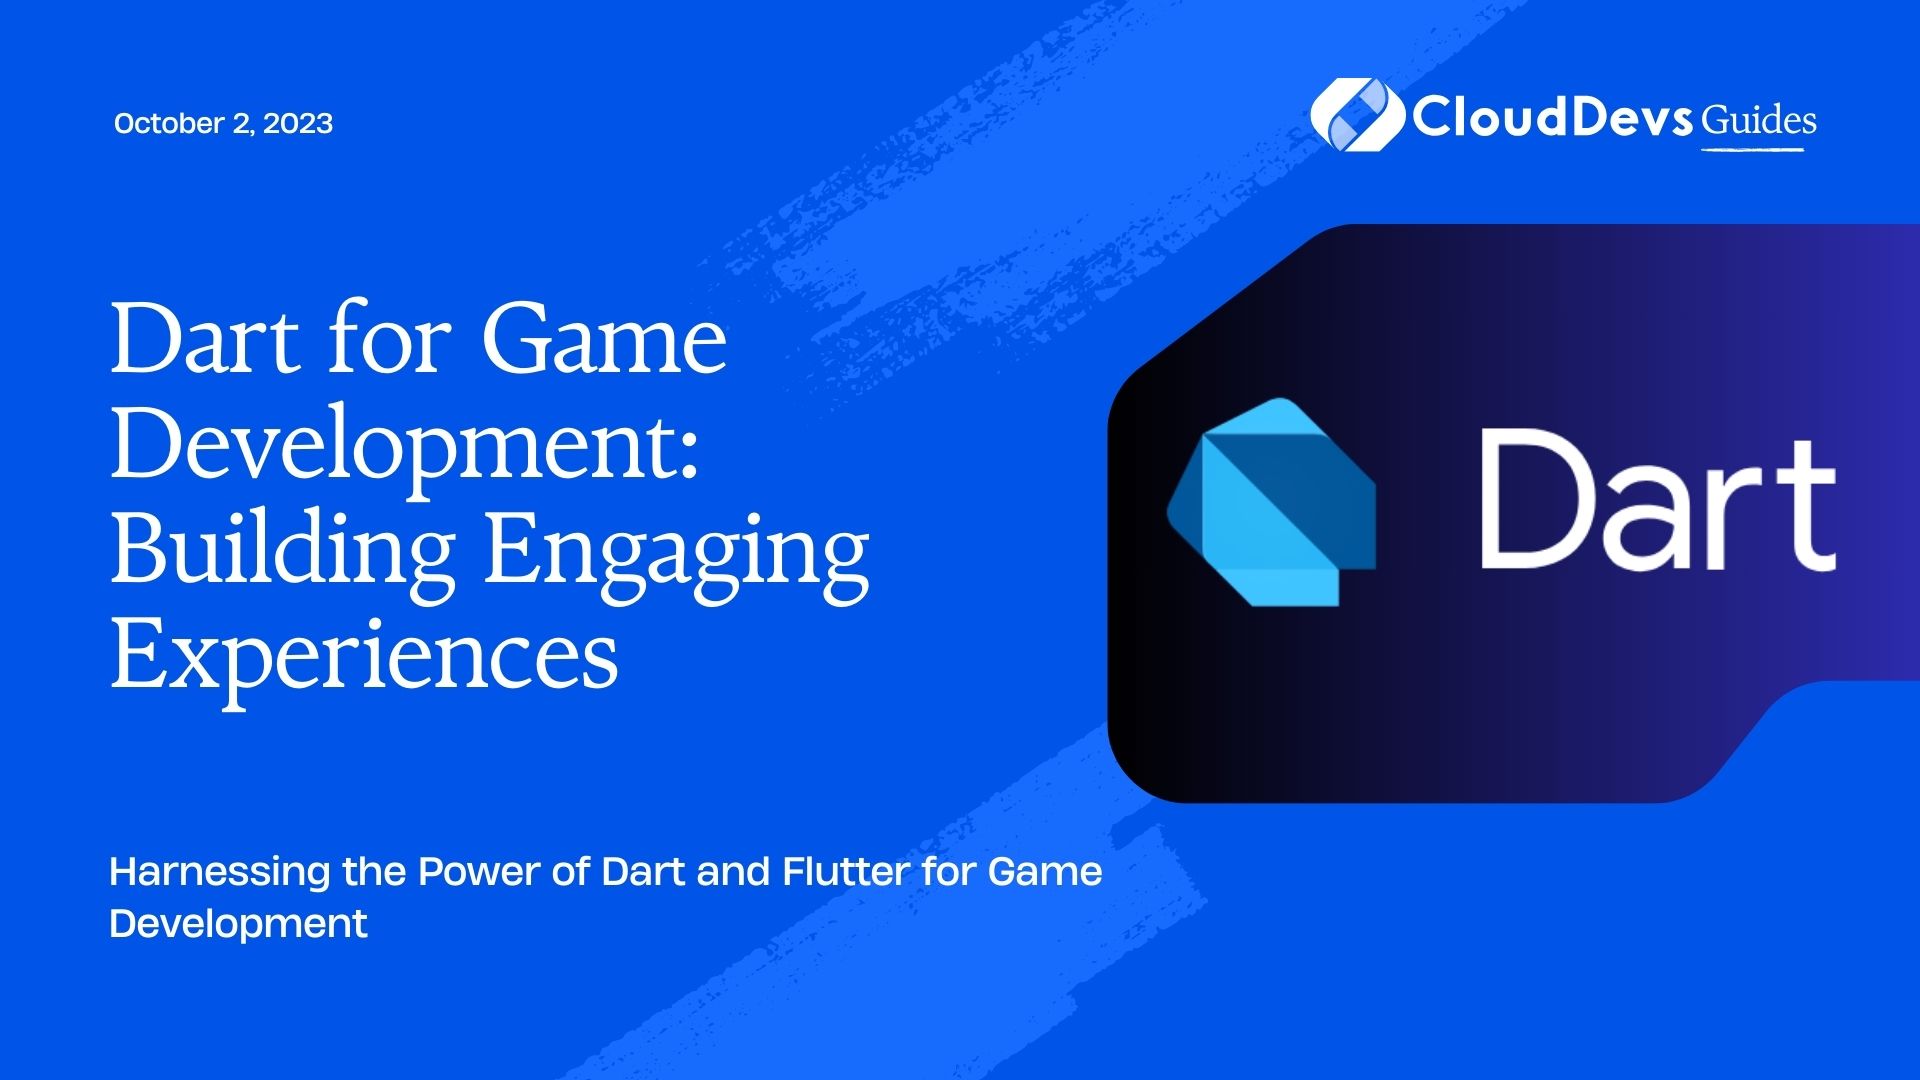 Dart for Game Development: Building Engaging Experiences